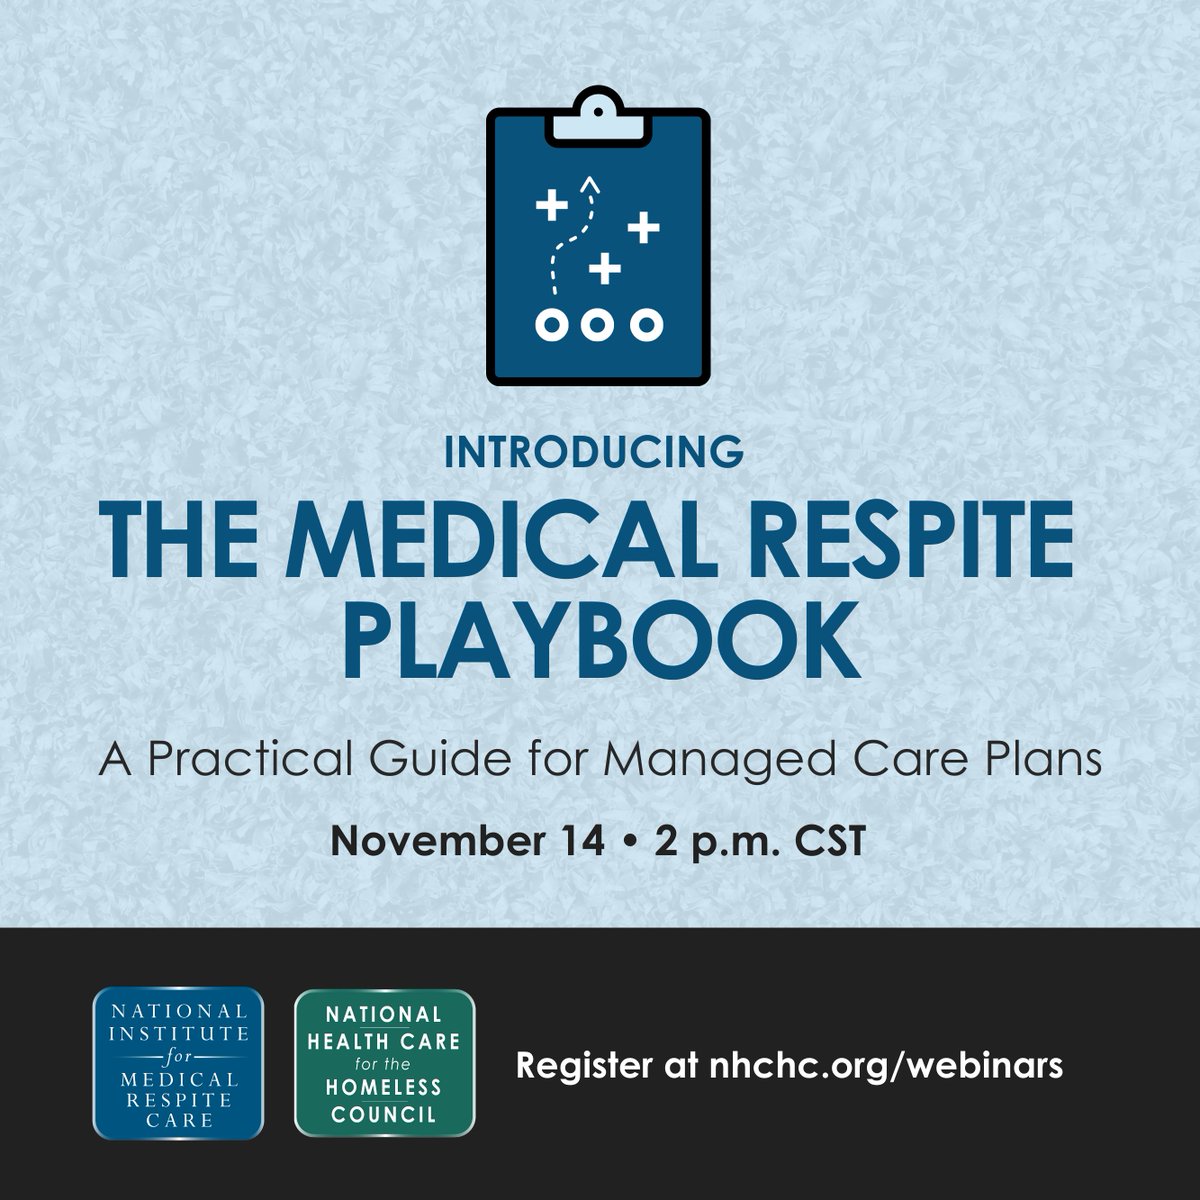 Please join us Nov. 14 at 2 p.m. CST to officially launch the #MedicalRespite Playbook and explore this new resource together! Register here: us06web.zoom.us/webinar/regist…